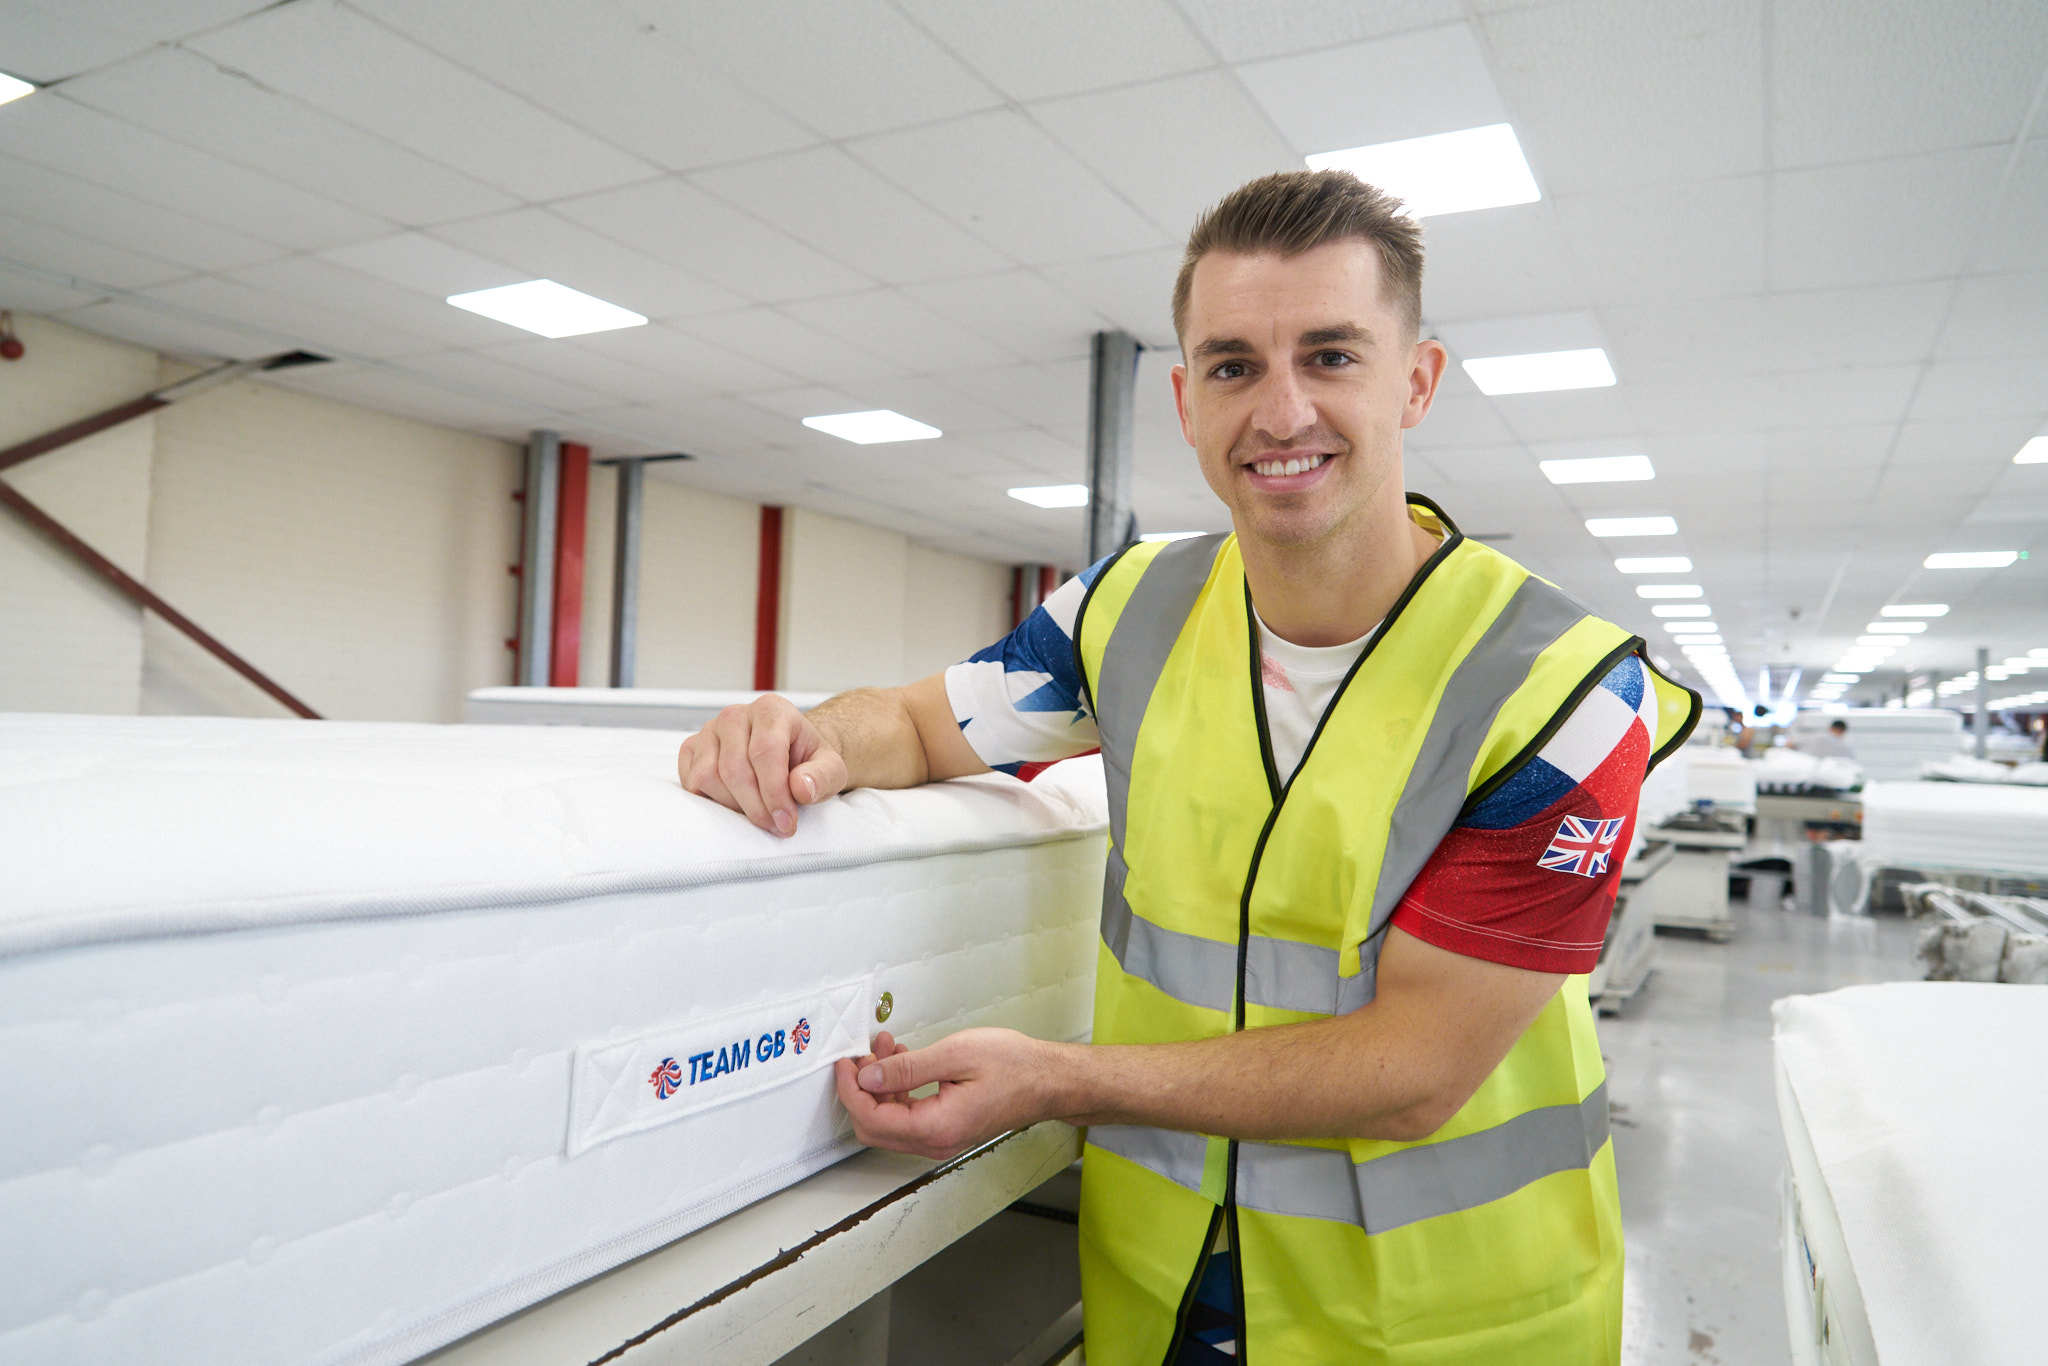 Max Whitlock visted Dreams head office in High Wycombe